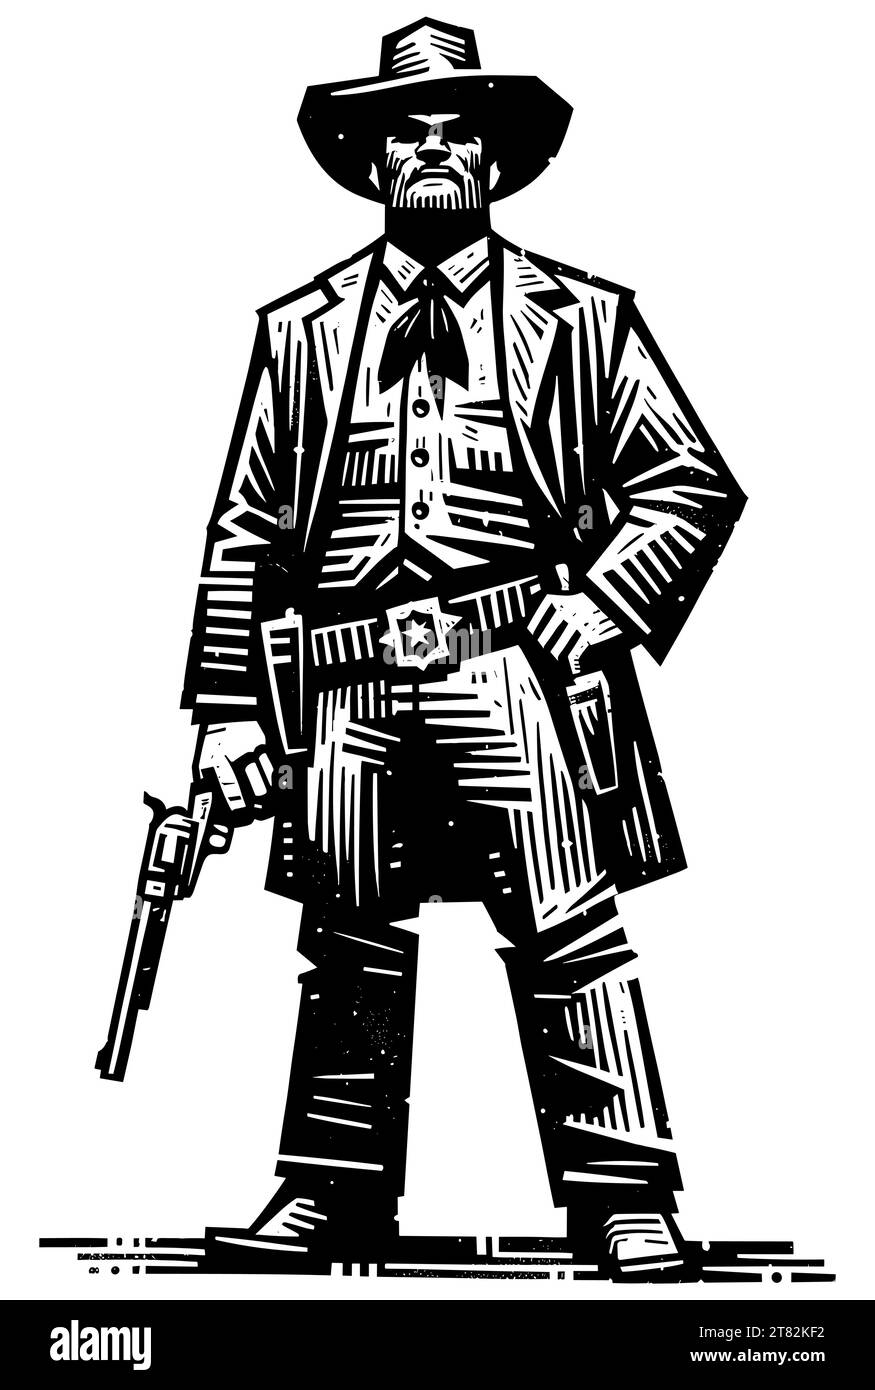 Linocut style illustration of American sheriff from the Wild West. Stock Vector